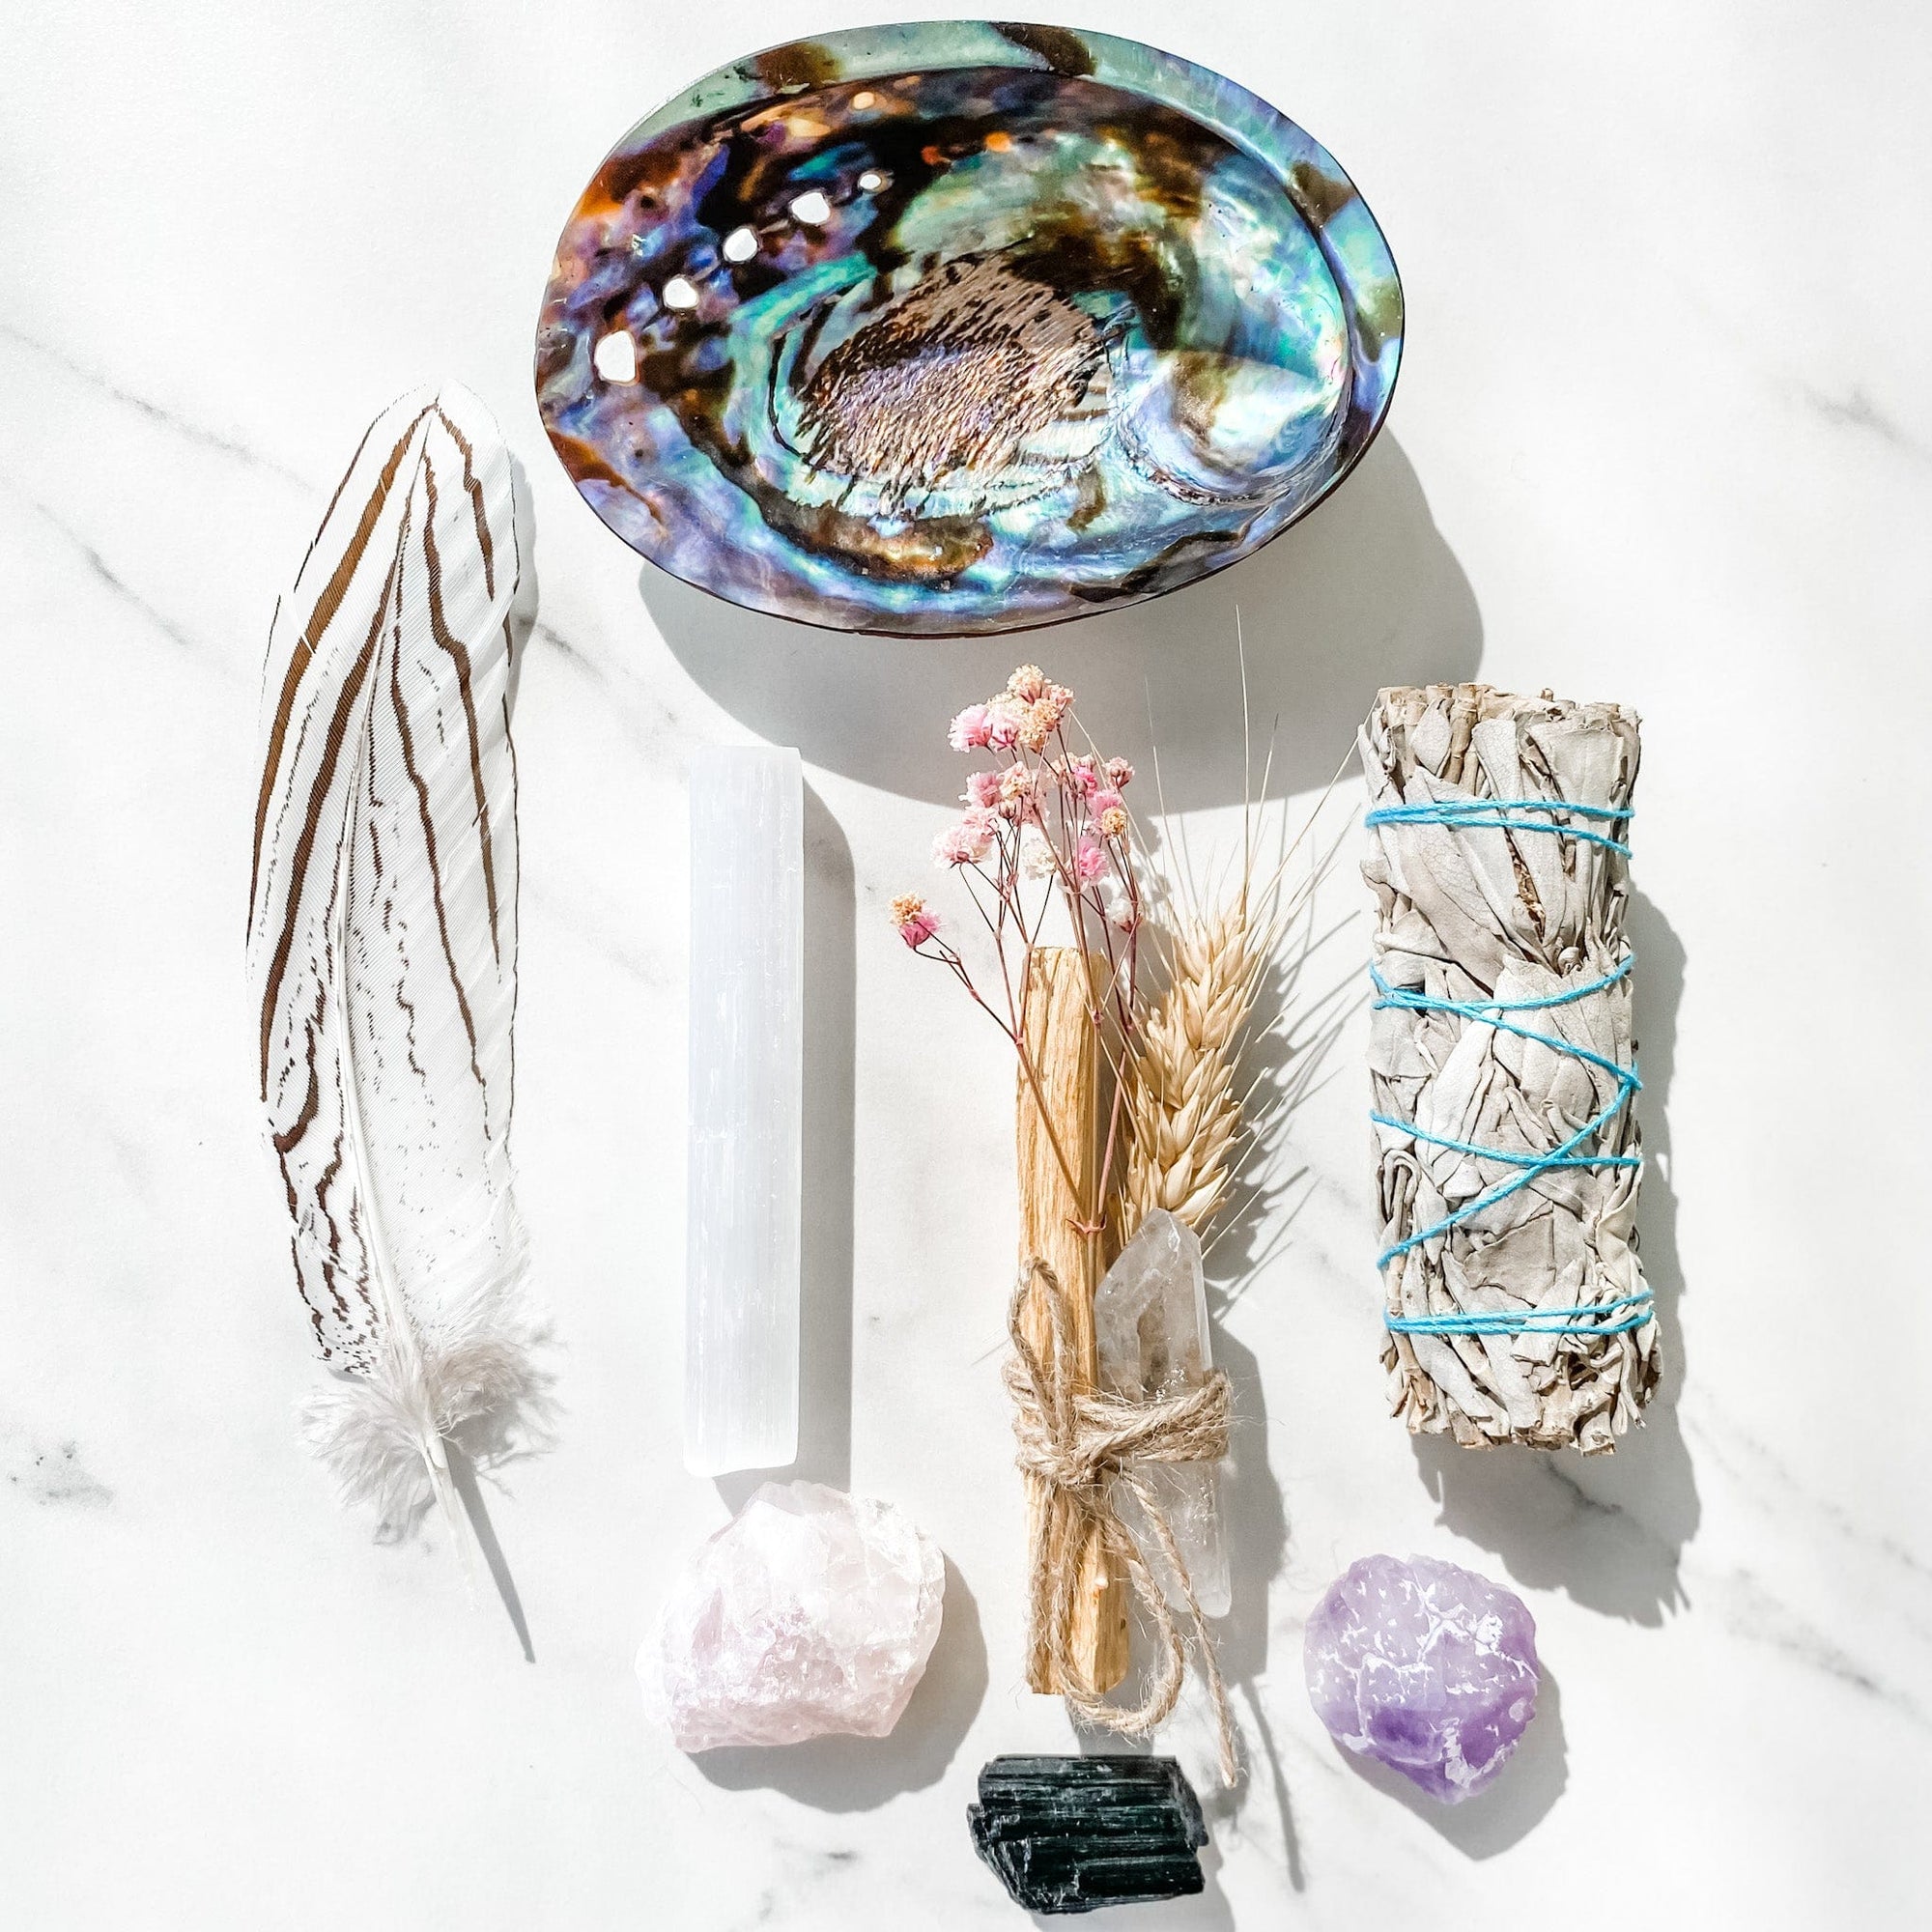 s1067 natural abalone cleansing smudging ritual crystal kit home protection eliminate negative energy crystals australia gemrox sydney 2